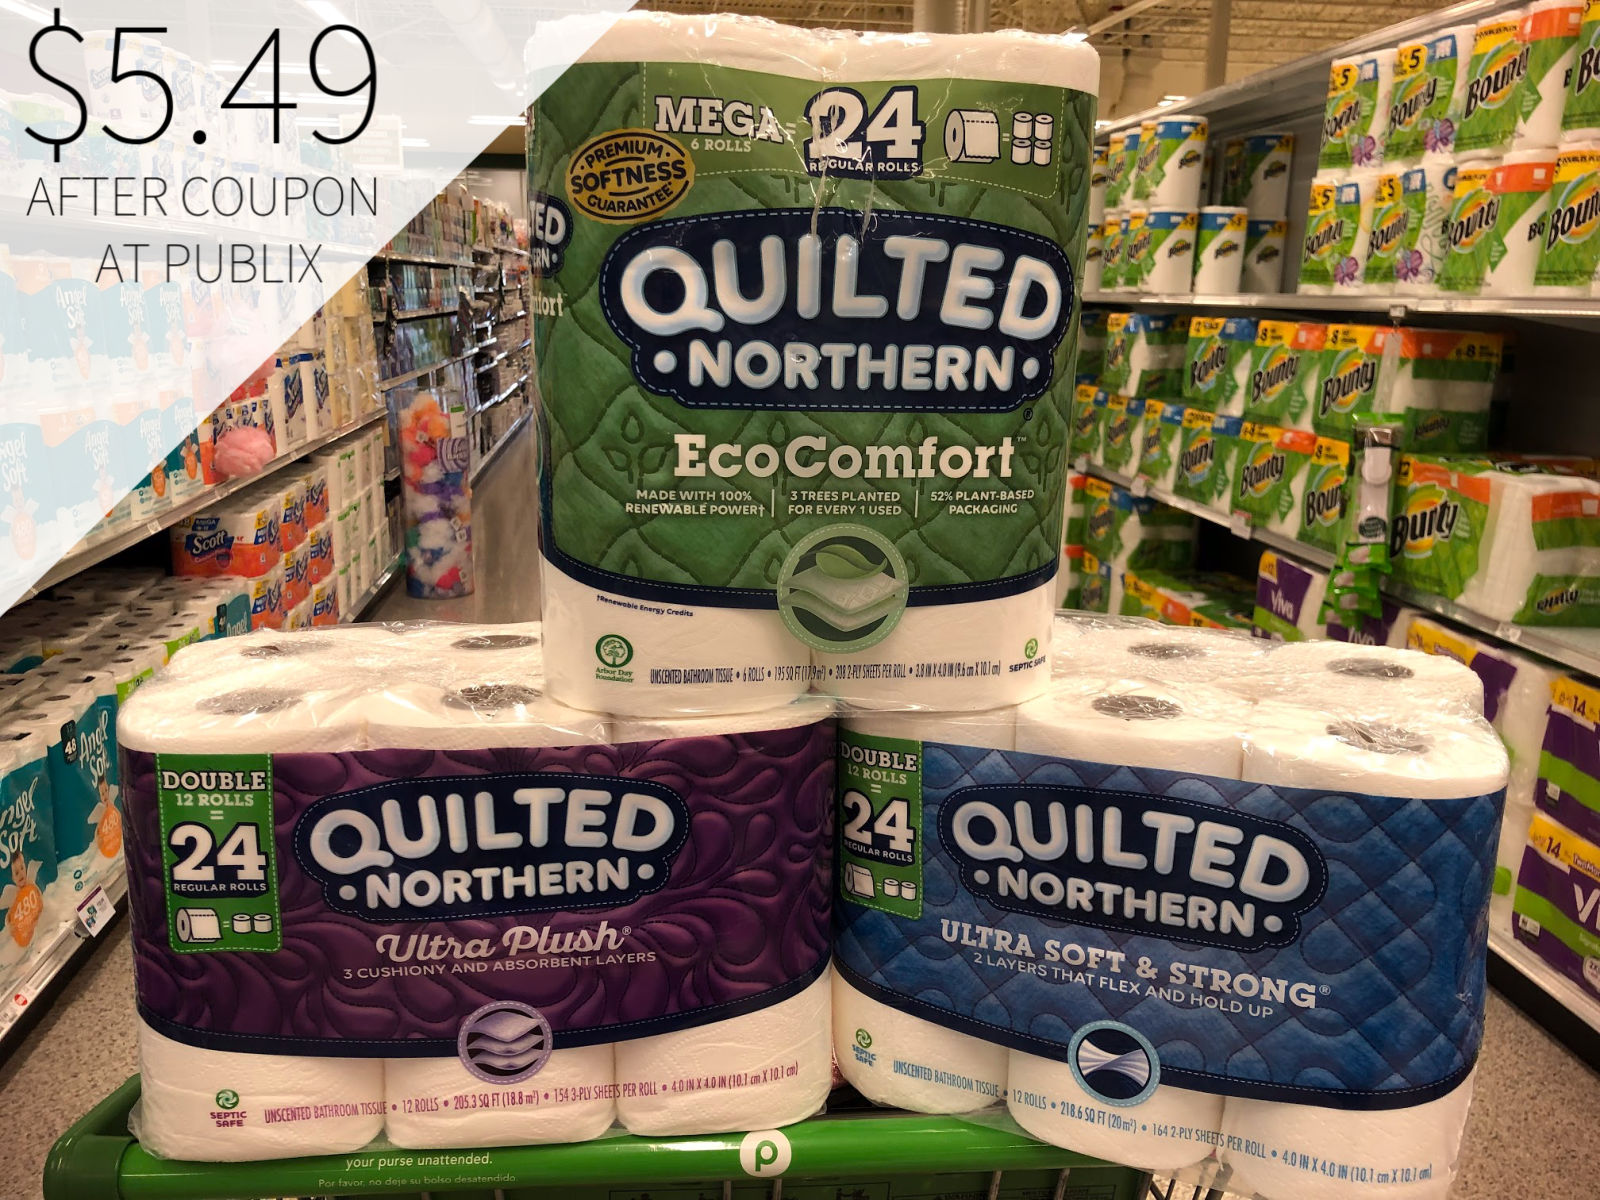 Quilted Northern Bathroom Tissue, Double Roll, 2 Ply, Unscented